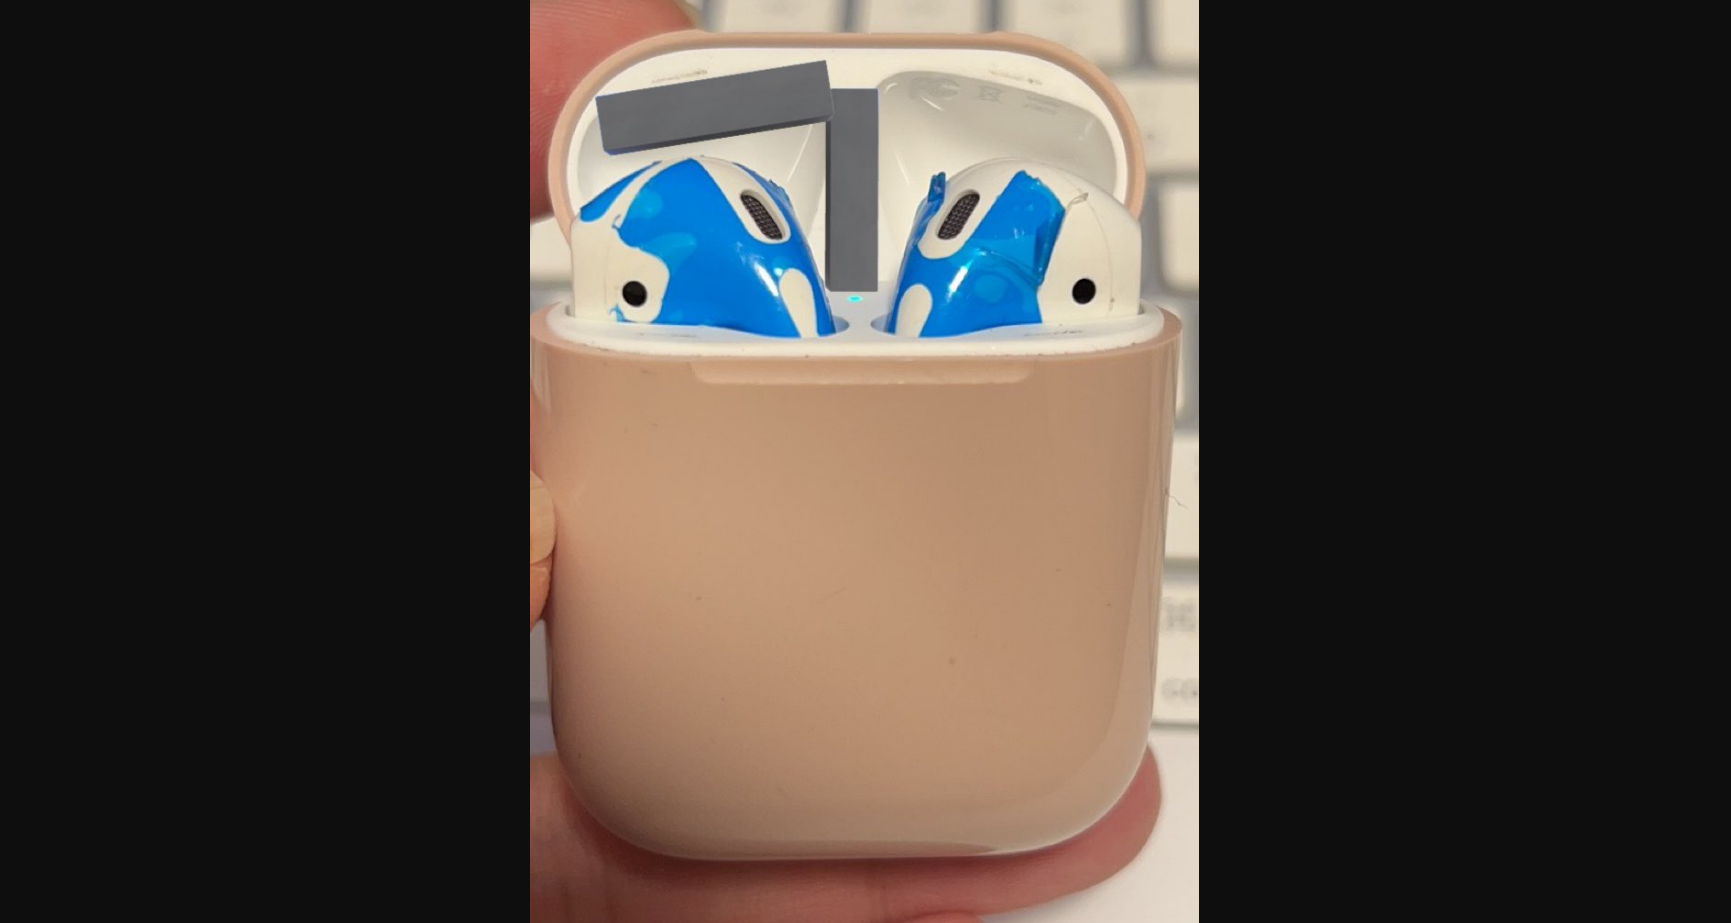 Colorful AirPods